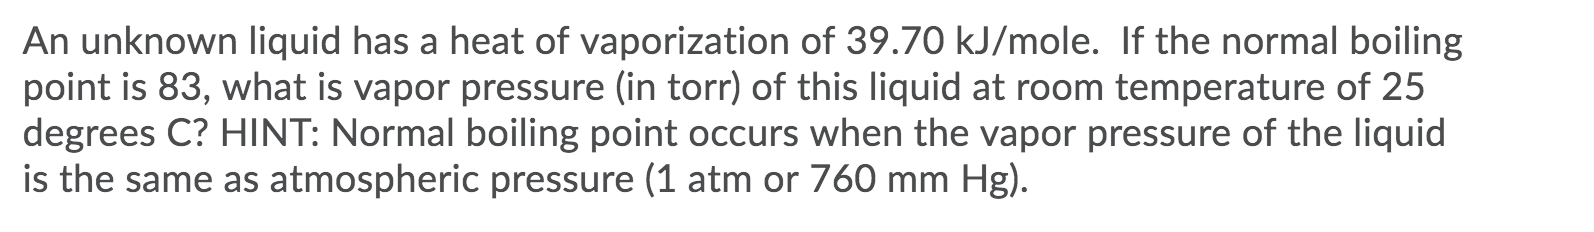 An unknown liquid has a heat of vaporization of 39.70 kJ/mole. If the normal boiling
point is 83, what is vapor pressure (in torr) of this liquid at room temperature of 25
degrees C? HINT: Normal boiling point occurs when the vapor pressure of the liquid
is the same as atmospheric pressure (1 atm or 760 mm Hg).
